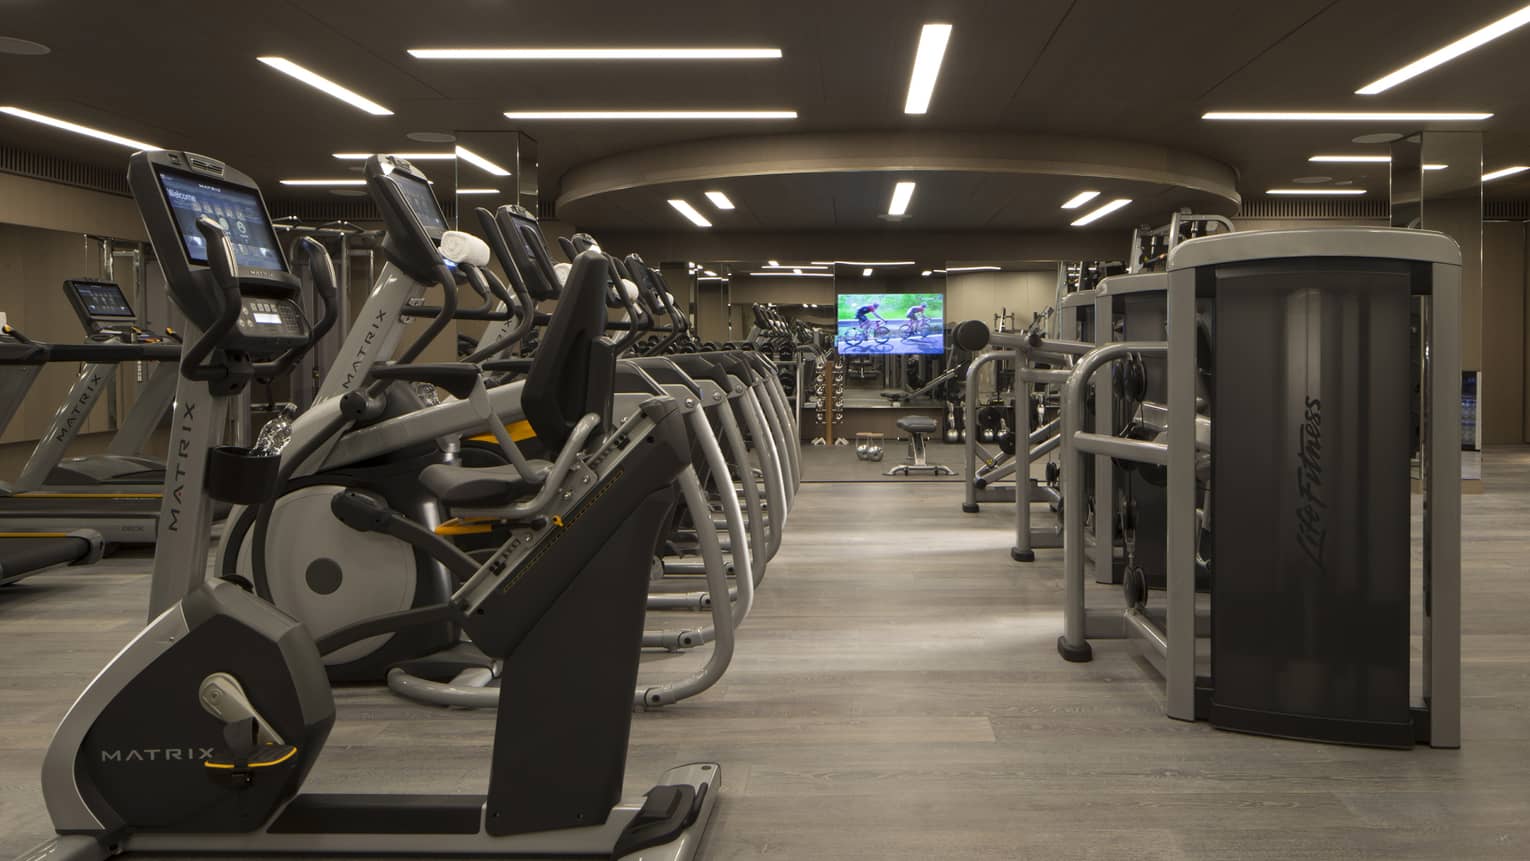 A fully-equipped gym with cardio and weight machines under dim lights.